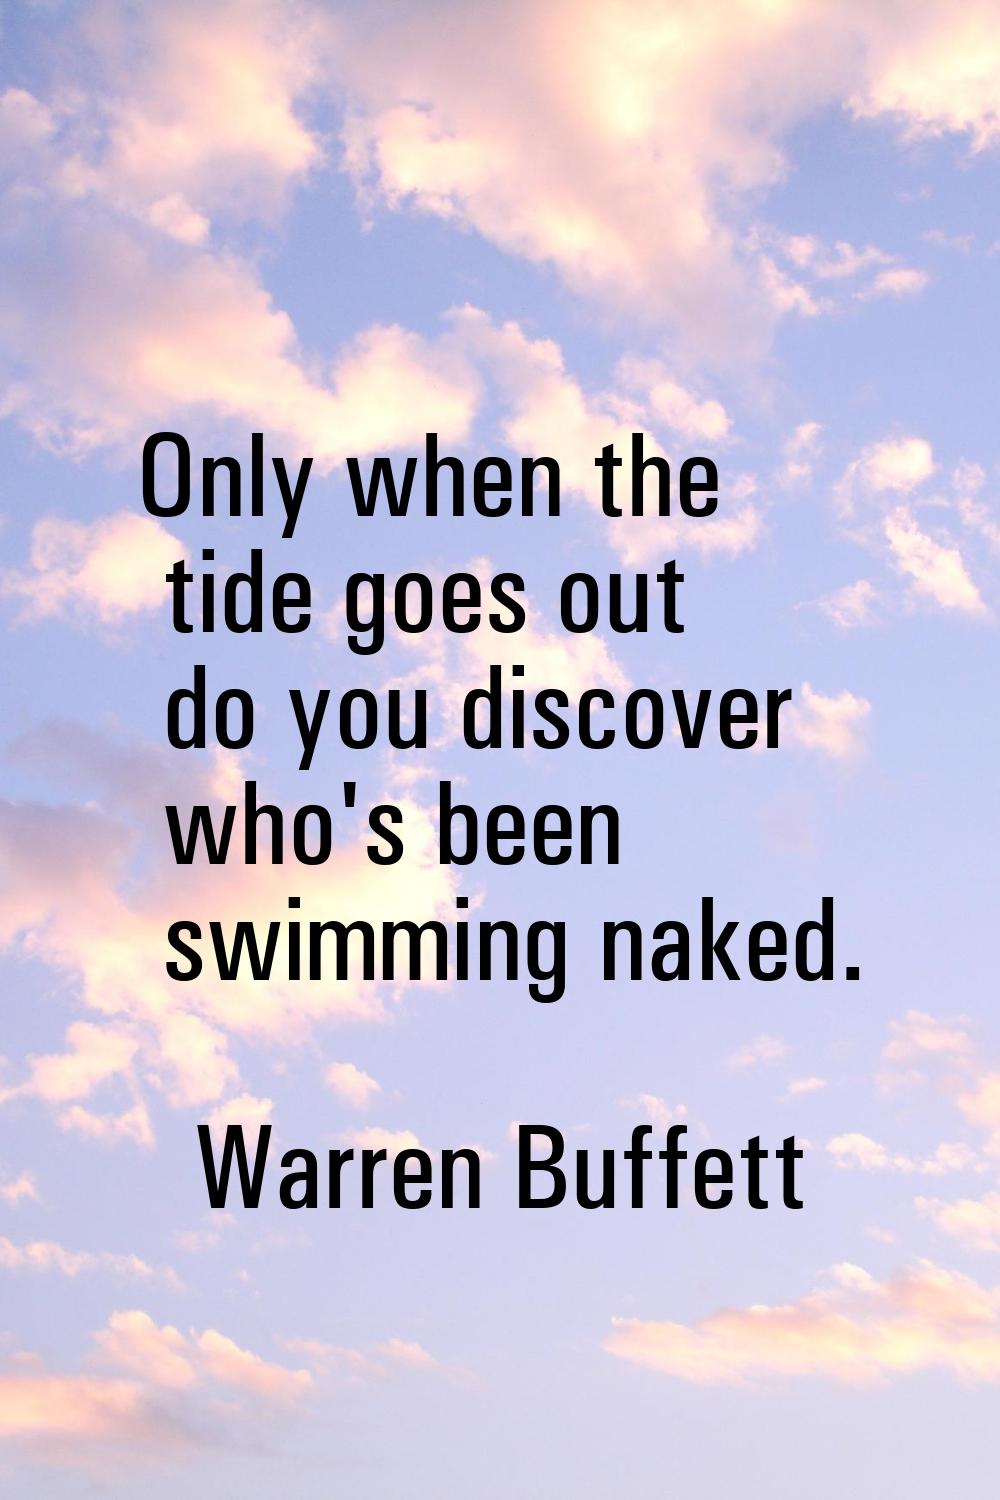 Only when the tide goes out do you discover who's been swimming naked.